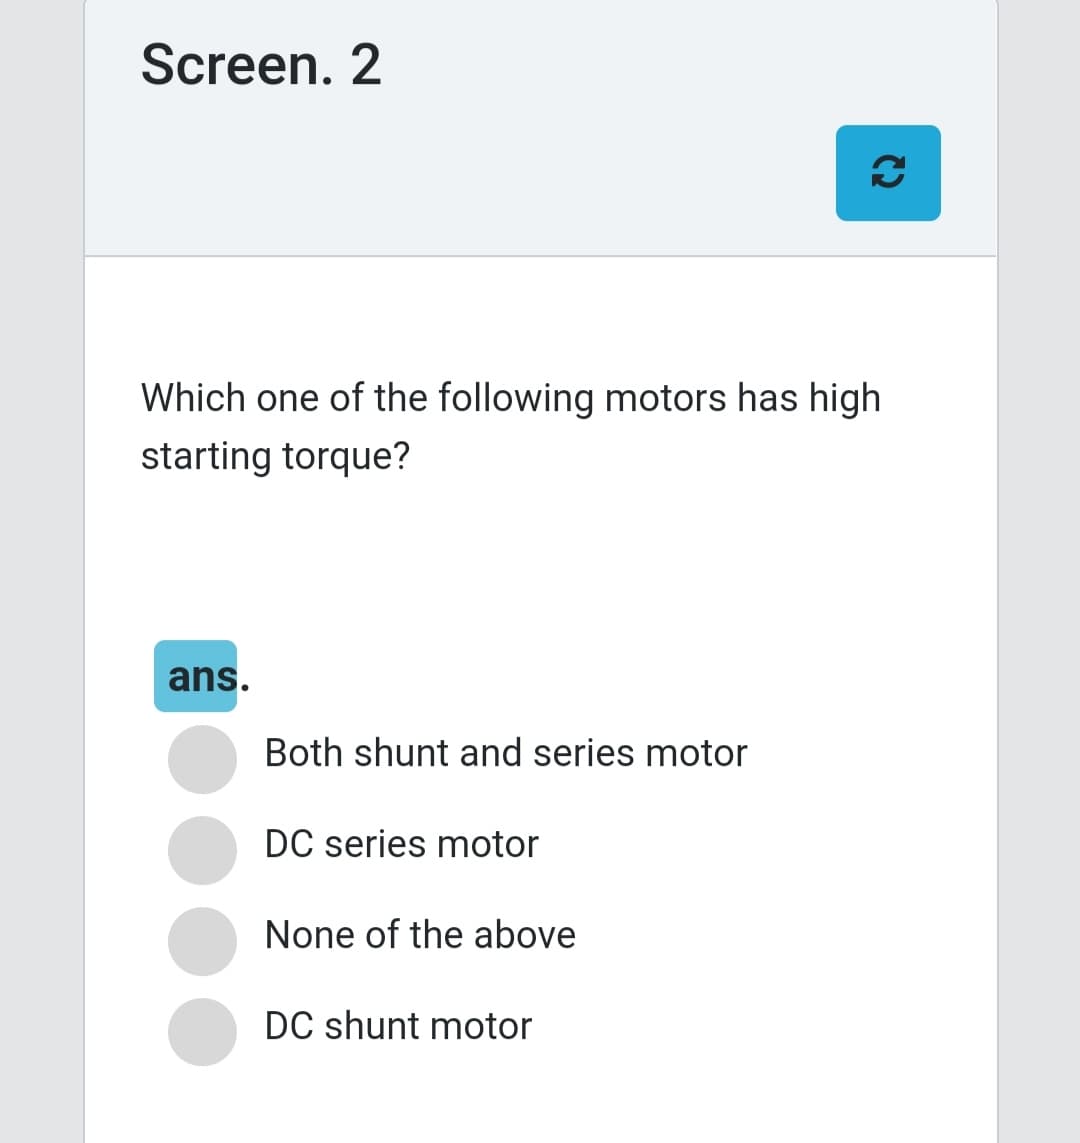 Screen. 2
Which one of the following motors has high
starting torque?
ans.
Both shunt and series motor
DC series motor
None of the above
DC shunt motor